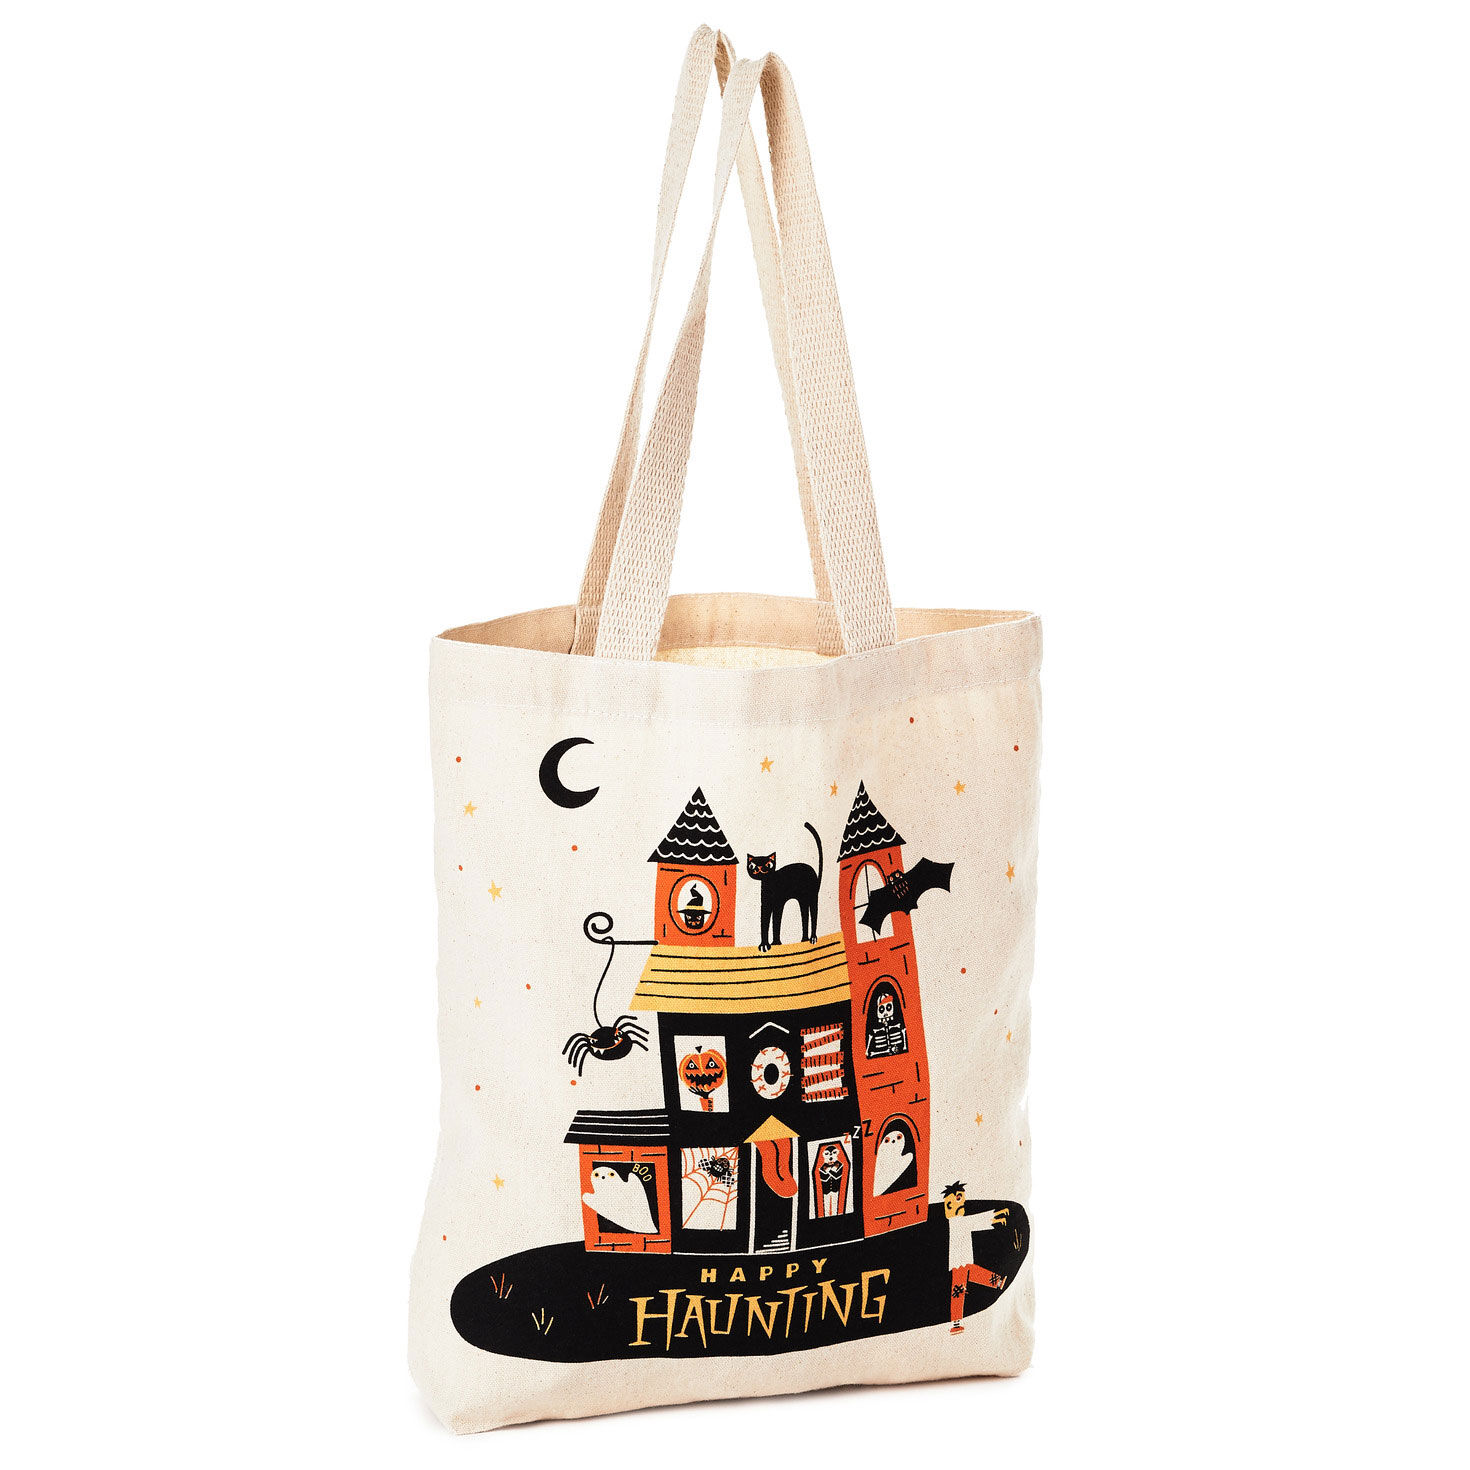 13" Happy Haunting Canvas Halloween Tote Bag for only USD 7.99 | Hallmark